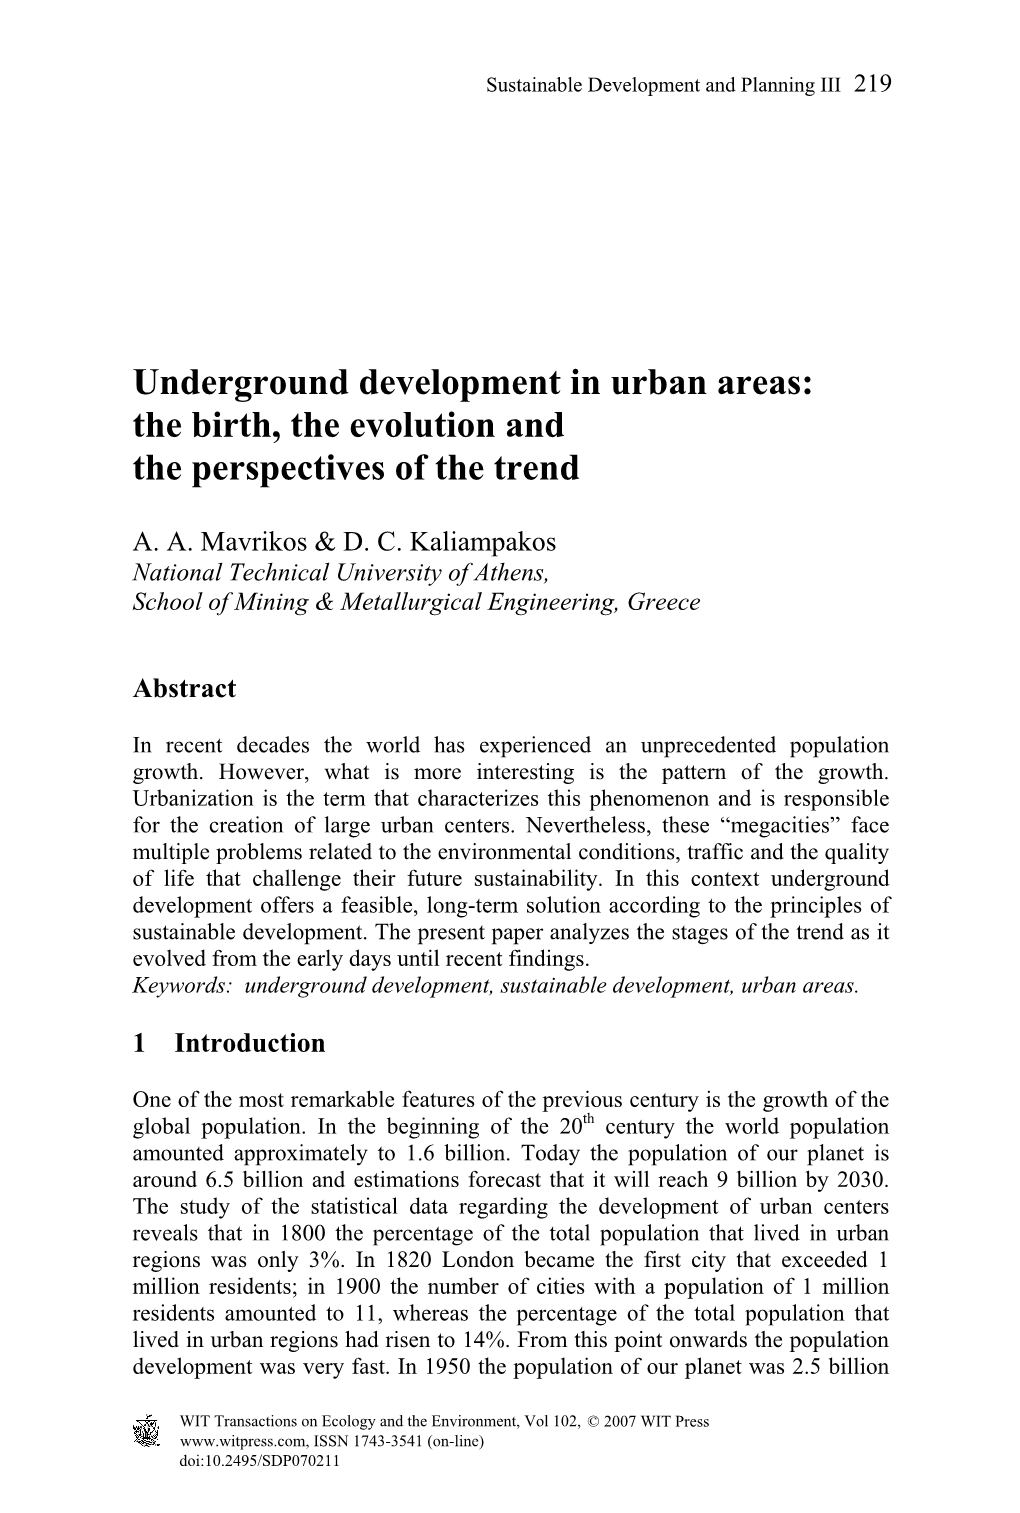 Underground Development in Urban Areas: the Birth, the Evolution and the Perspectives of the Trend